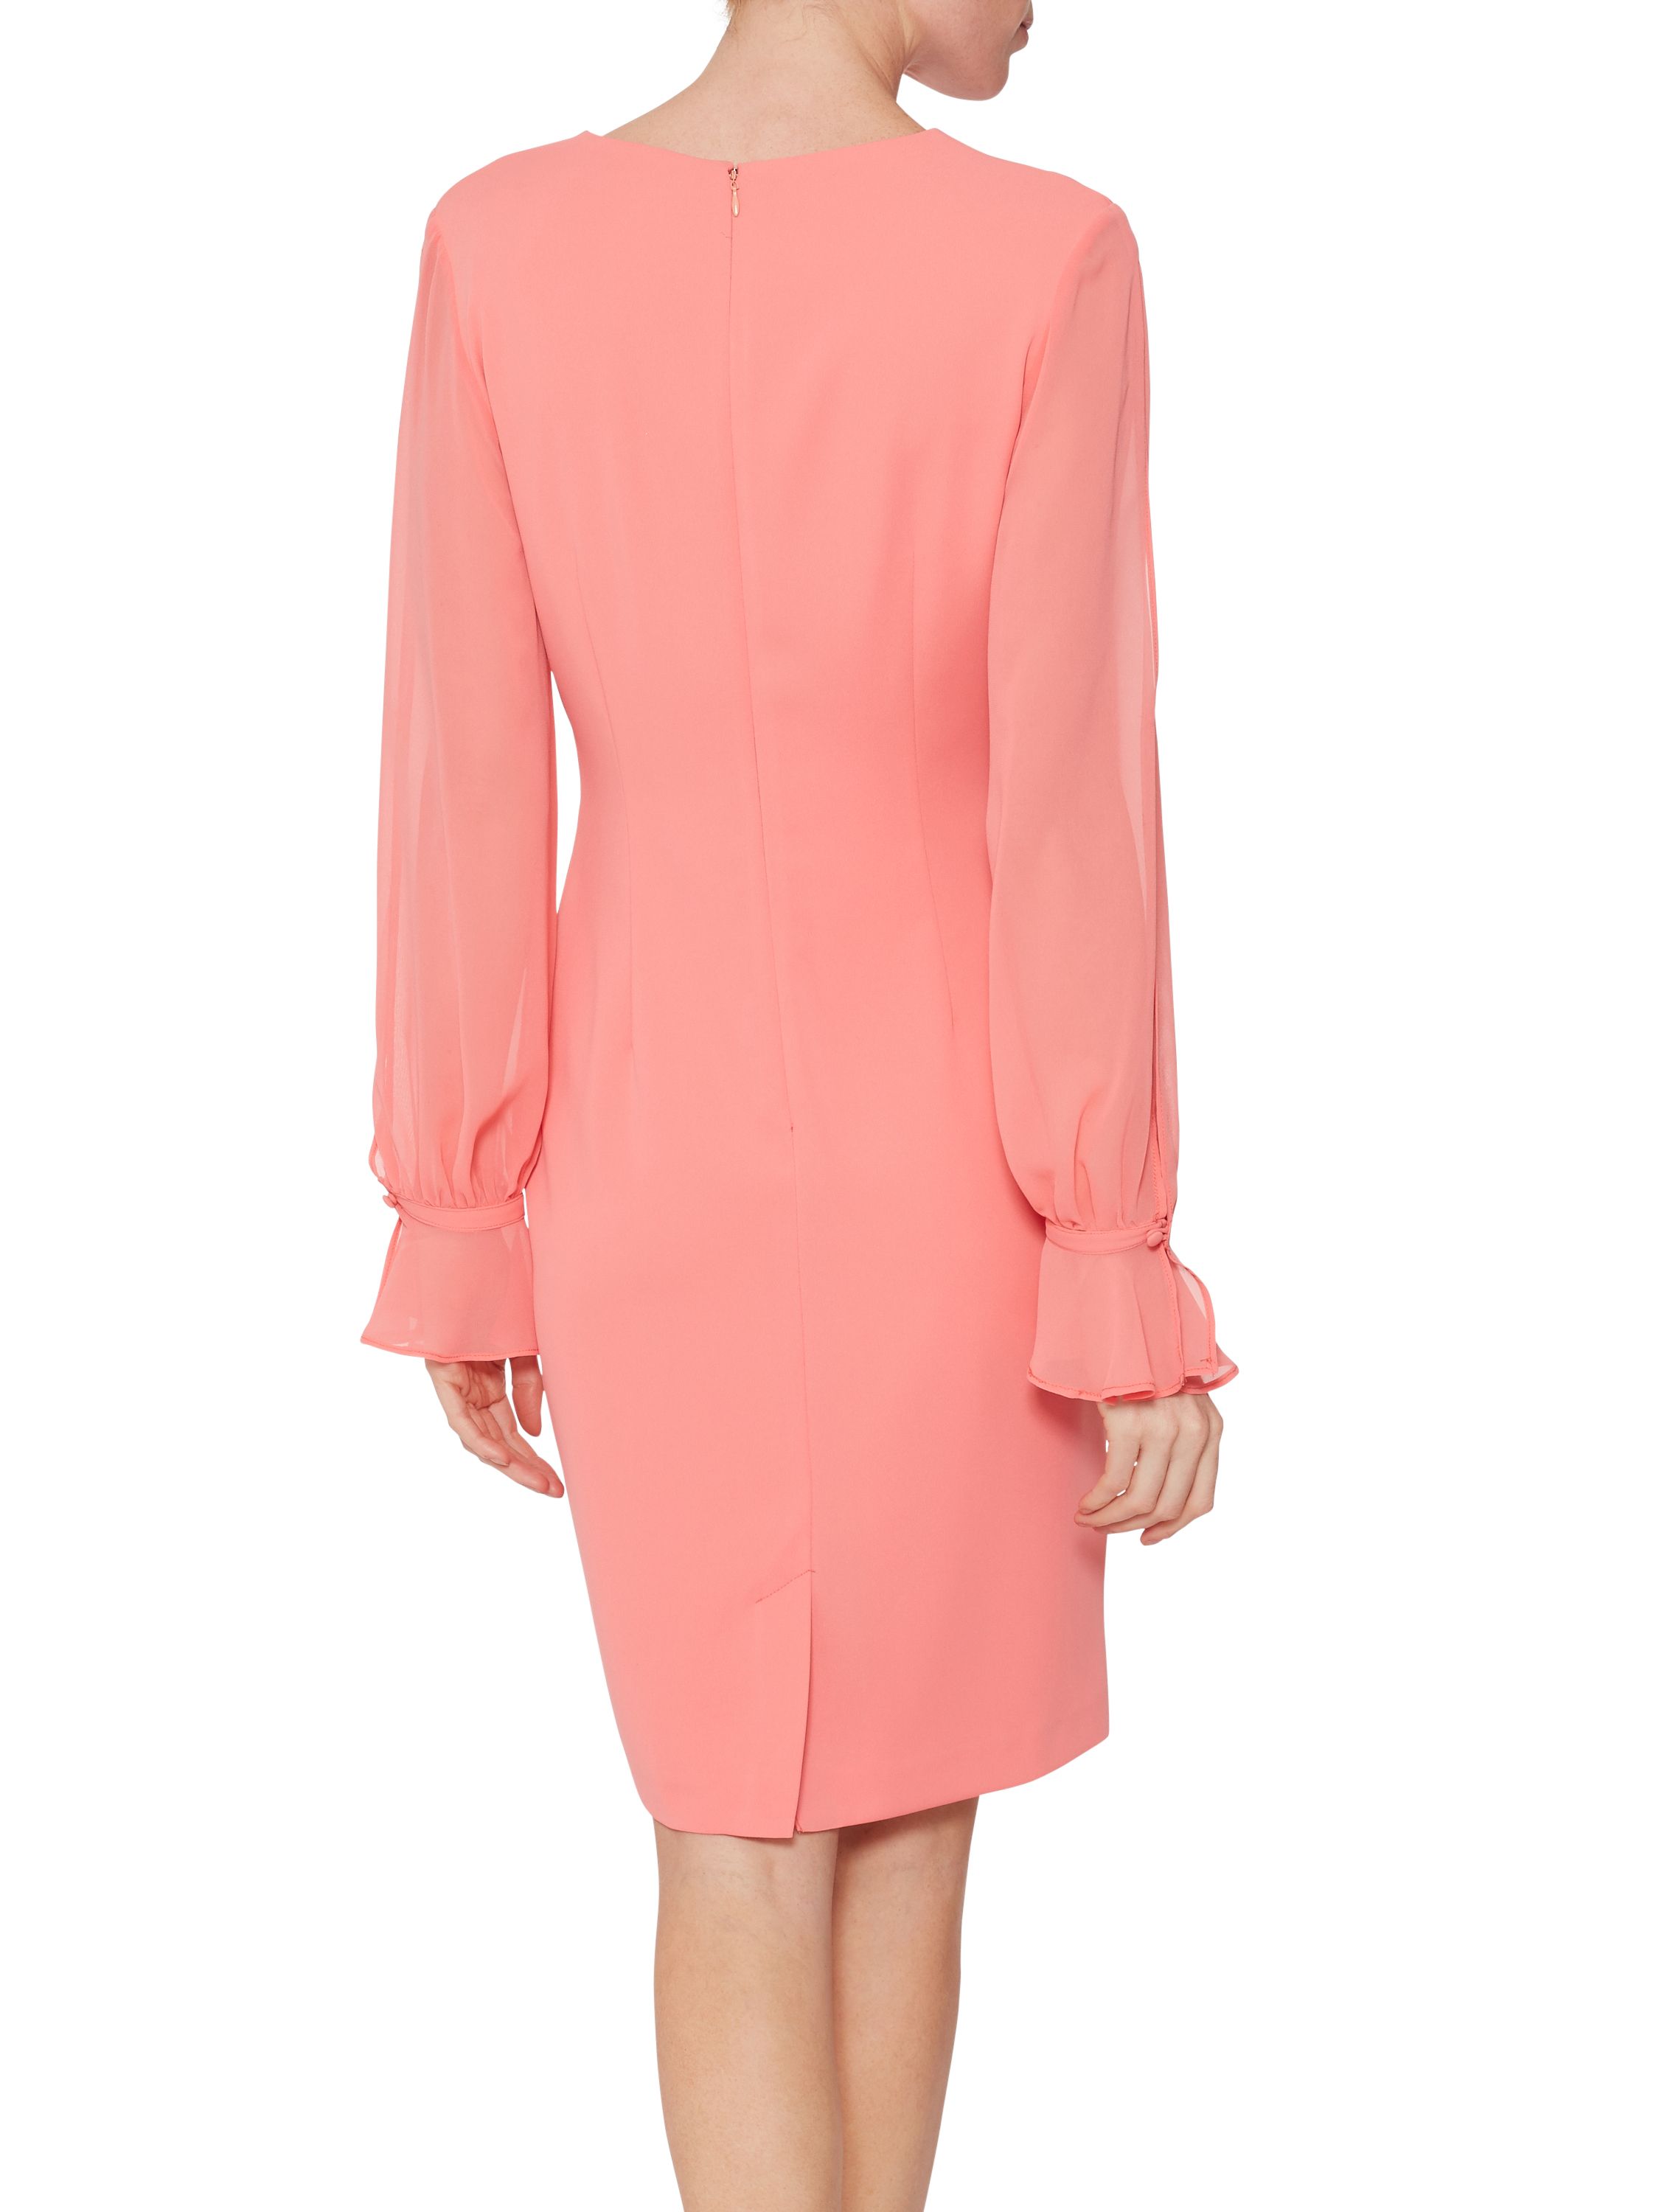 This crepe and chiffon dress by Gina Bacconi is a must-have piece this season. The dress takes a simple shift dress made out of crepe and features a stunning sheer chiffon sleeve which is finished with a dainty frill and is cuffed. With a V shaped neckline. The dress is fully lined and fastens with a concealed back zip.